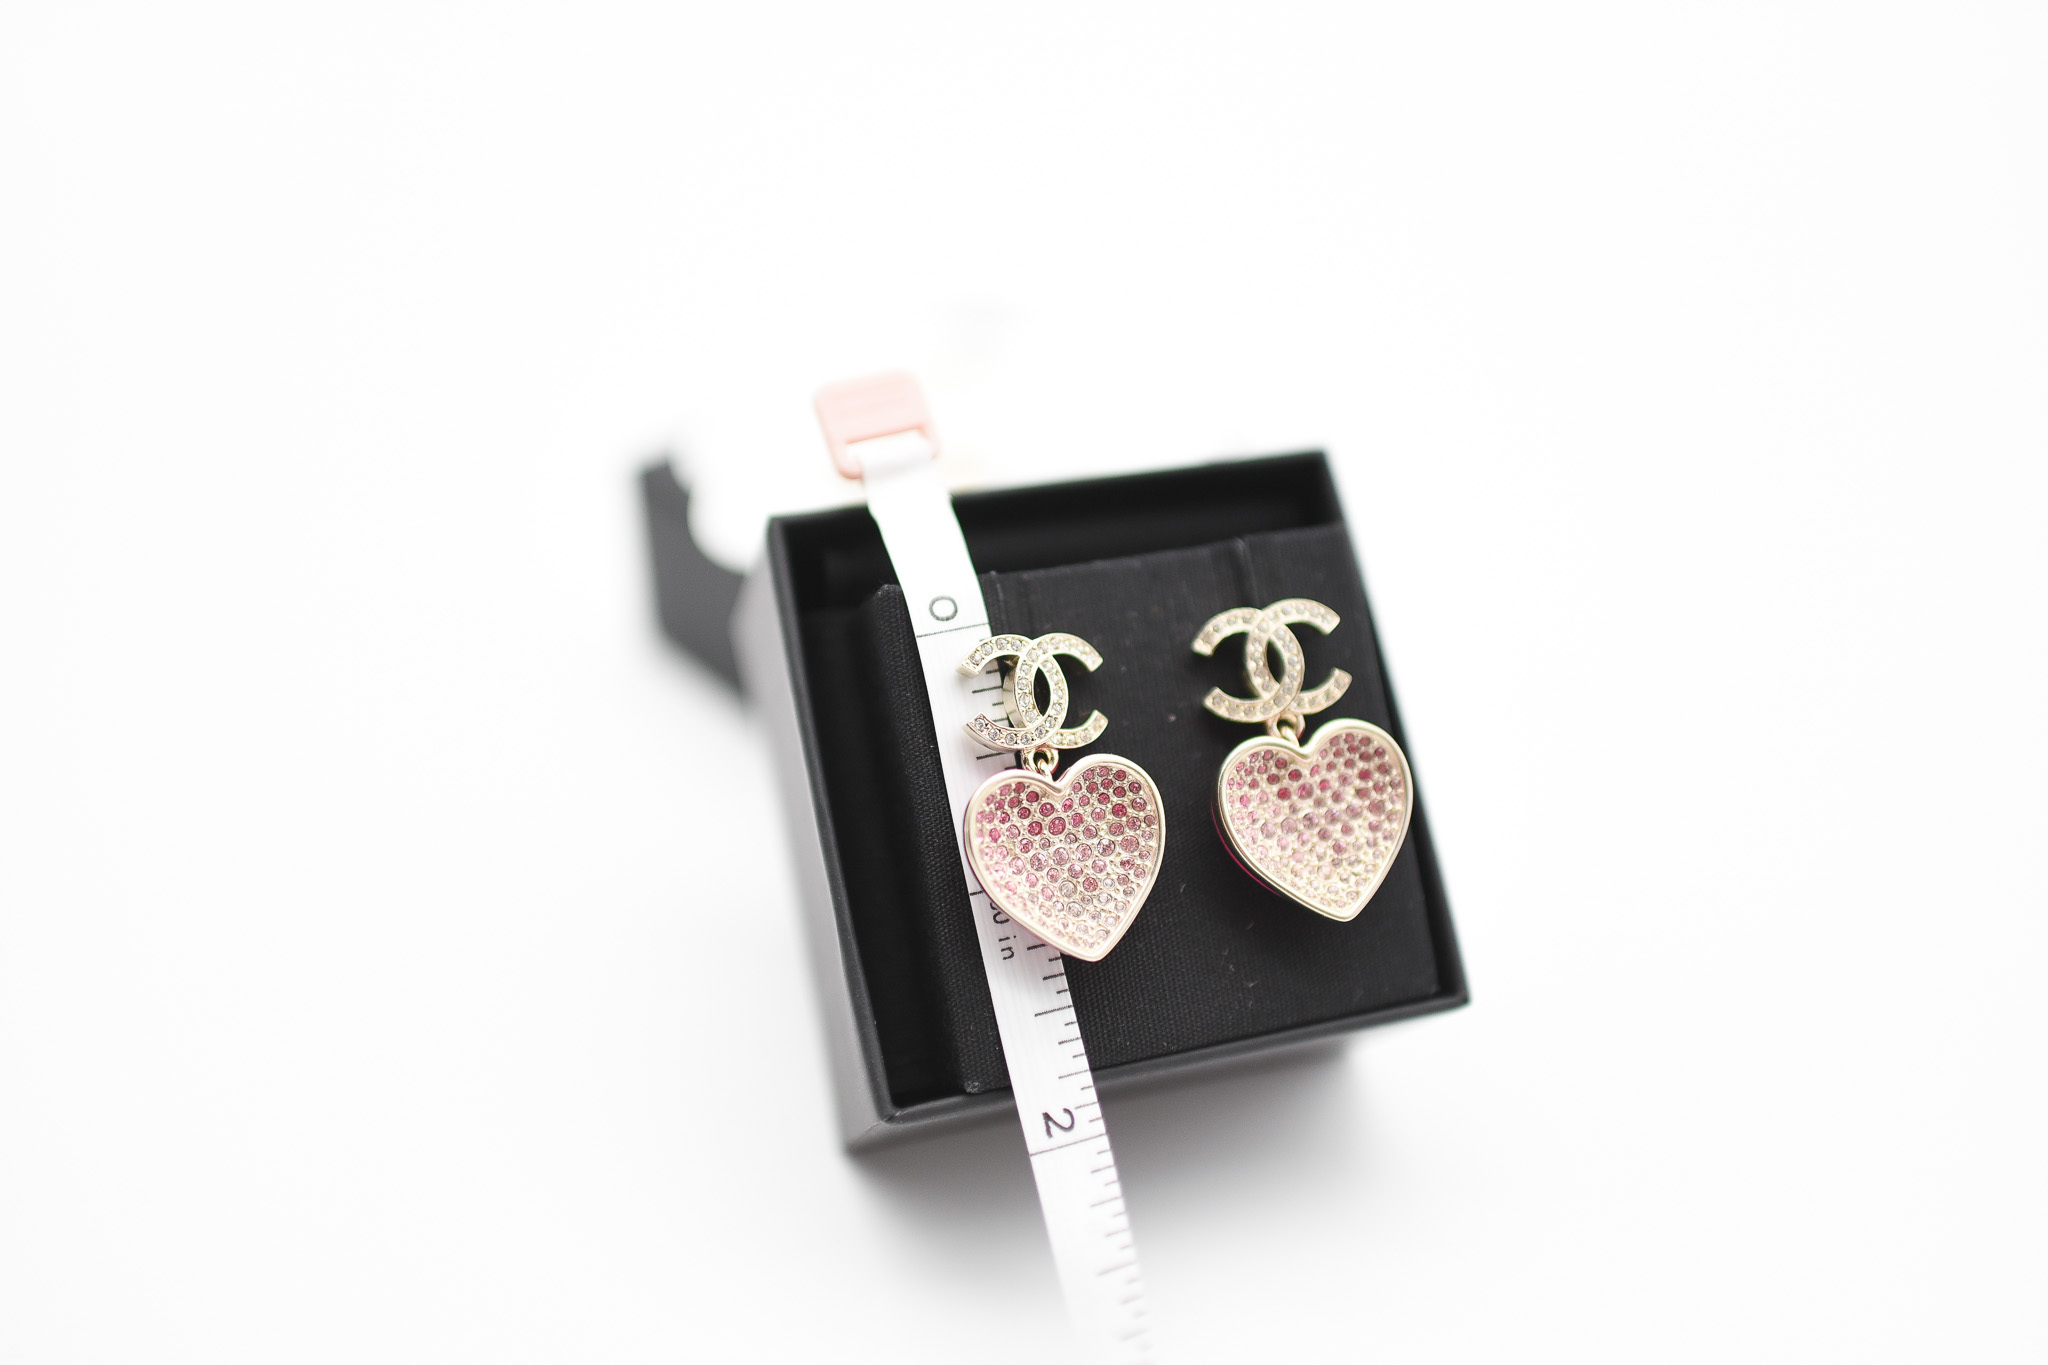 Chanel Earrings Heart Drop, Pink Crystals, Gold Hardware, New in Box MA001